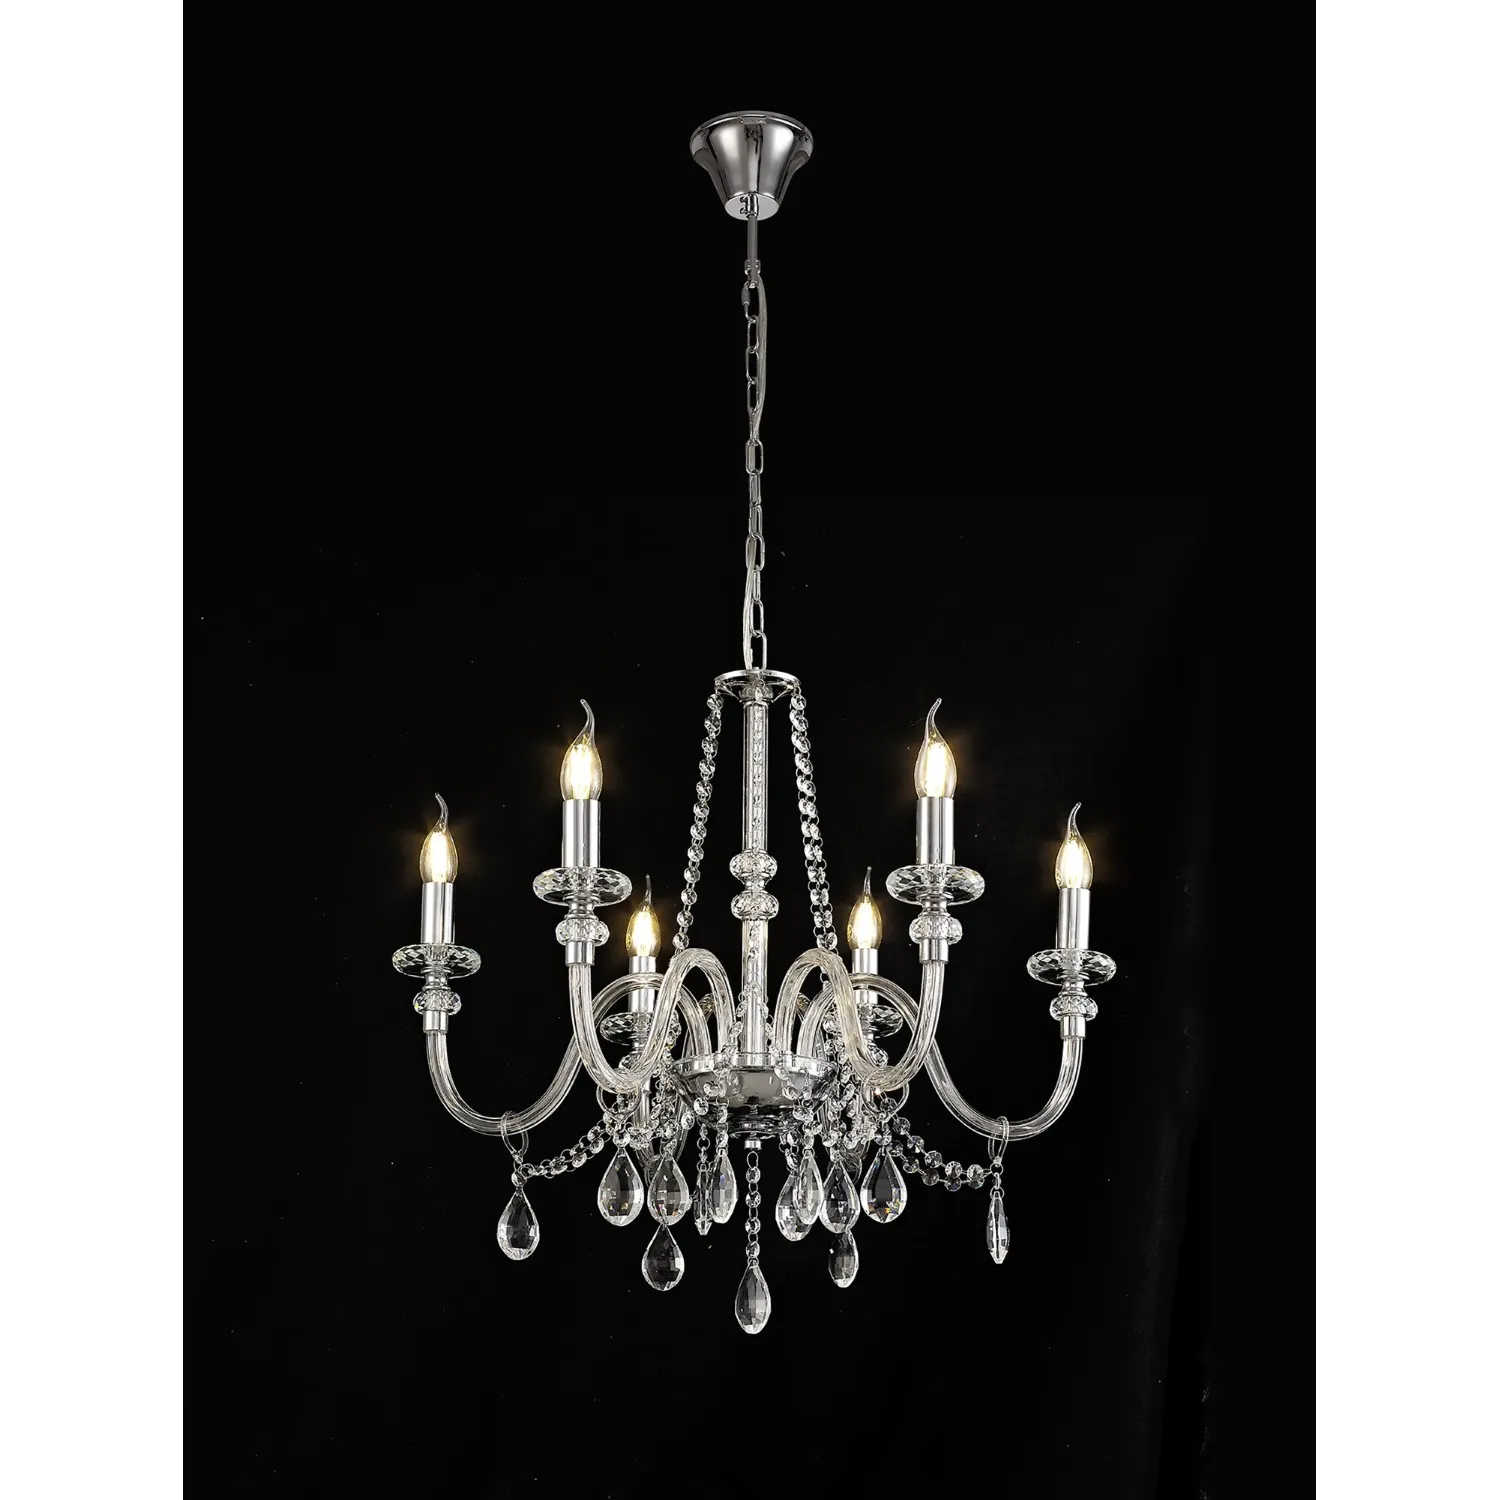 Wimbledon Chandelier Pendant, 6 Light E14, Polished Chrome Clear Glass Crystal, (ITEM REQUIRES CONSTRUCTION CONNECTION)